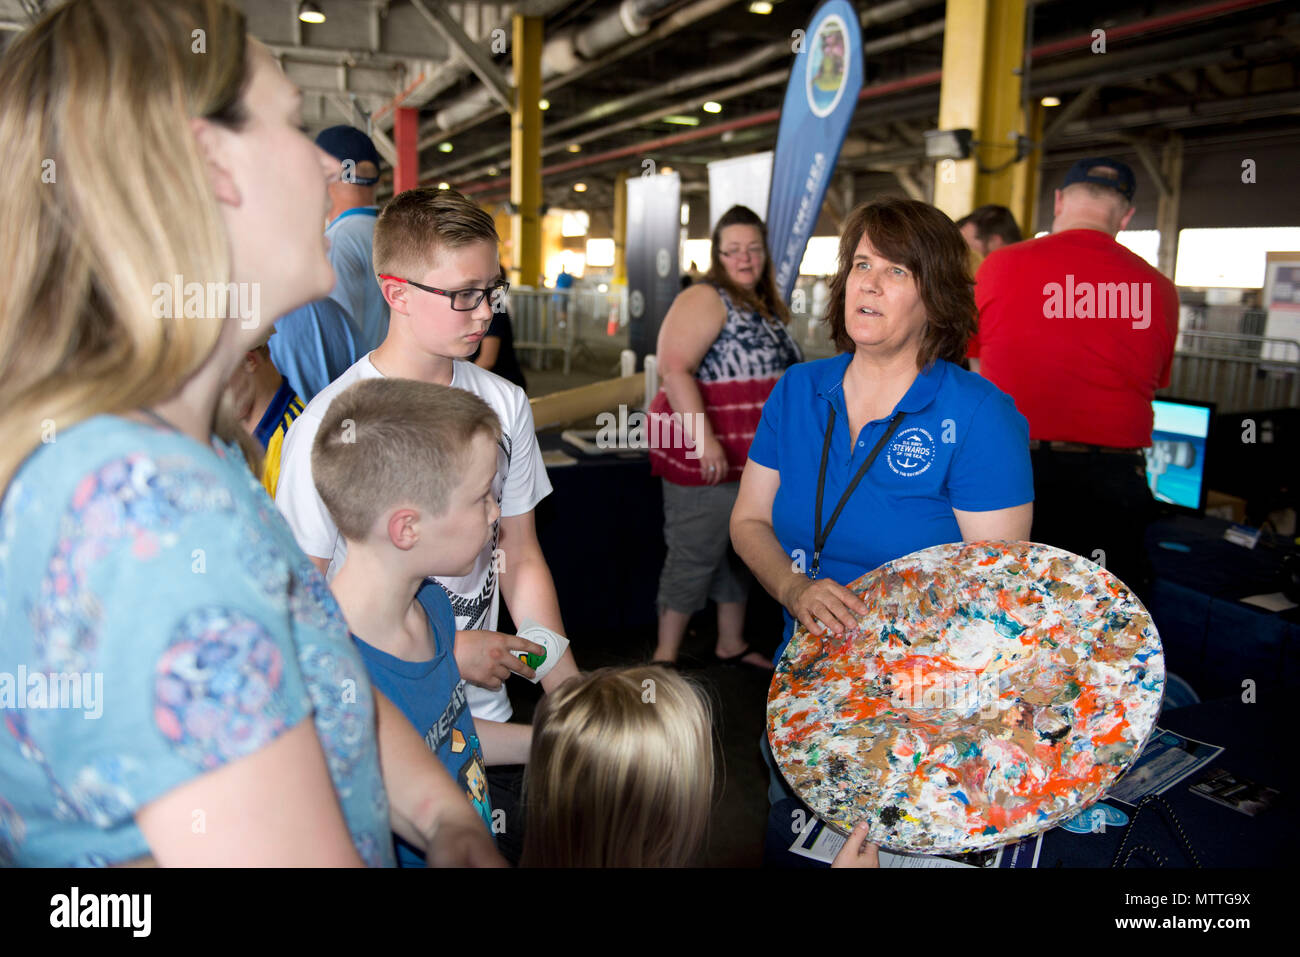 180526-N-IT235-0115 NEW YORK (May 26, 2018) Laura Busch, a natural resources program manager at U.S. Fleet Forces Command’s Fleet Environmental and Readiness Division, explains the shipboard waste process to reduce plastic waste aboard ships at the U.S. Navy’s “Stewards of the Sea: Defending Freedom, Protecting the Environment” exhibit during Fleet Week New York. The Navy employs every means available to mitigate the potential environmental effects of our activities without jeopardizing the safety of our Sailors or impacting our Navy readiness mission. (U.S. Navy photo by Mass Communication Sp Stock Photo